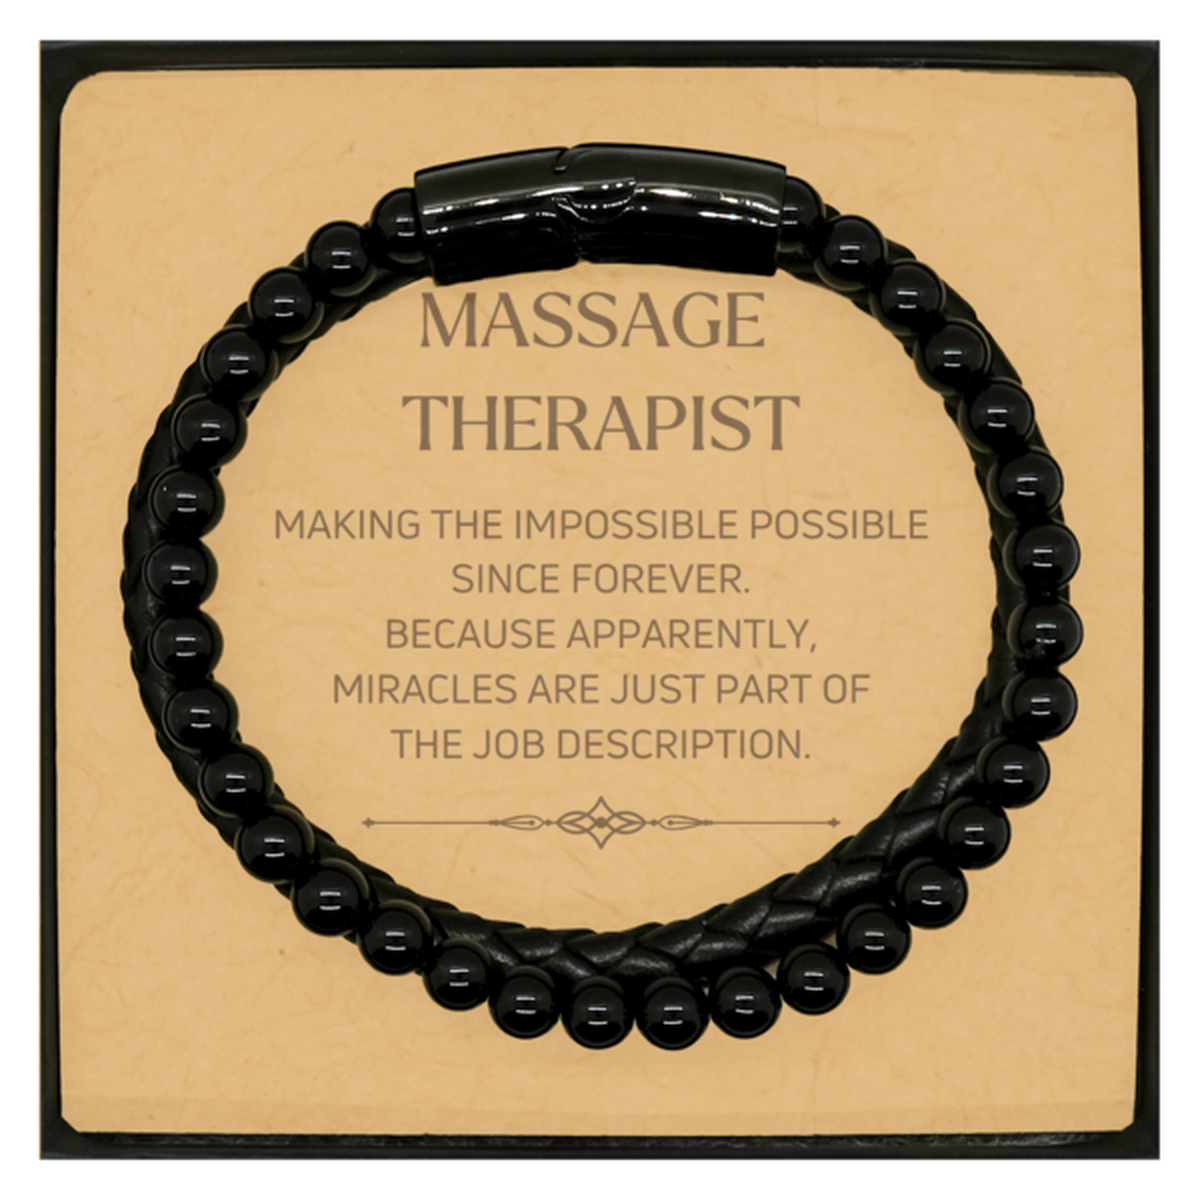 Funny Massage Therapist Gifts, Miracles are just part of the job description, Inspirational Birthday Christmas Stone Leather Bracelets For Massage Therapist, Men, Women, Coworkers, Friends, Boss